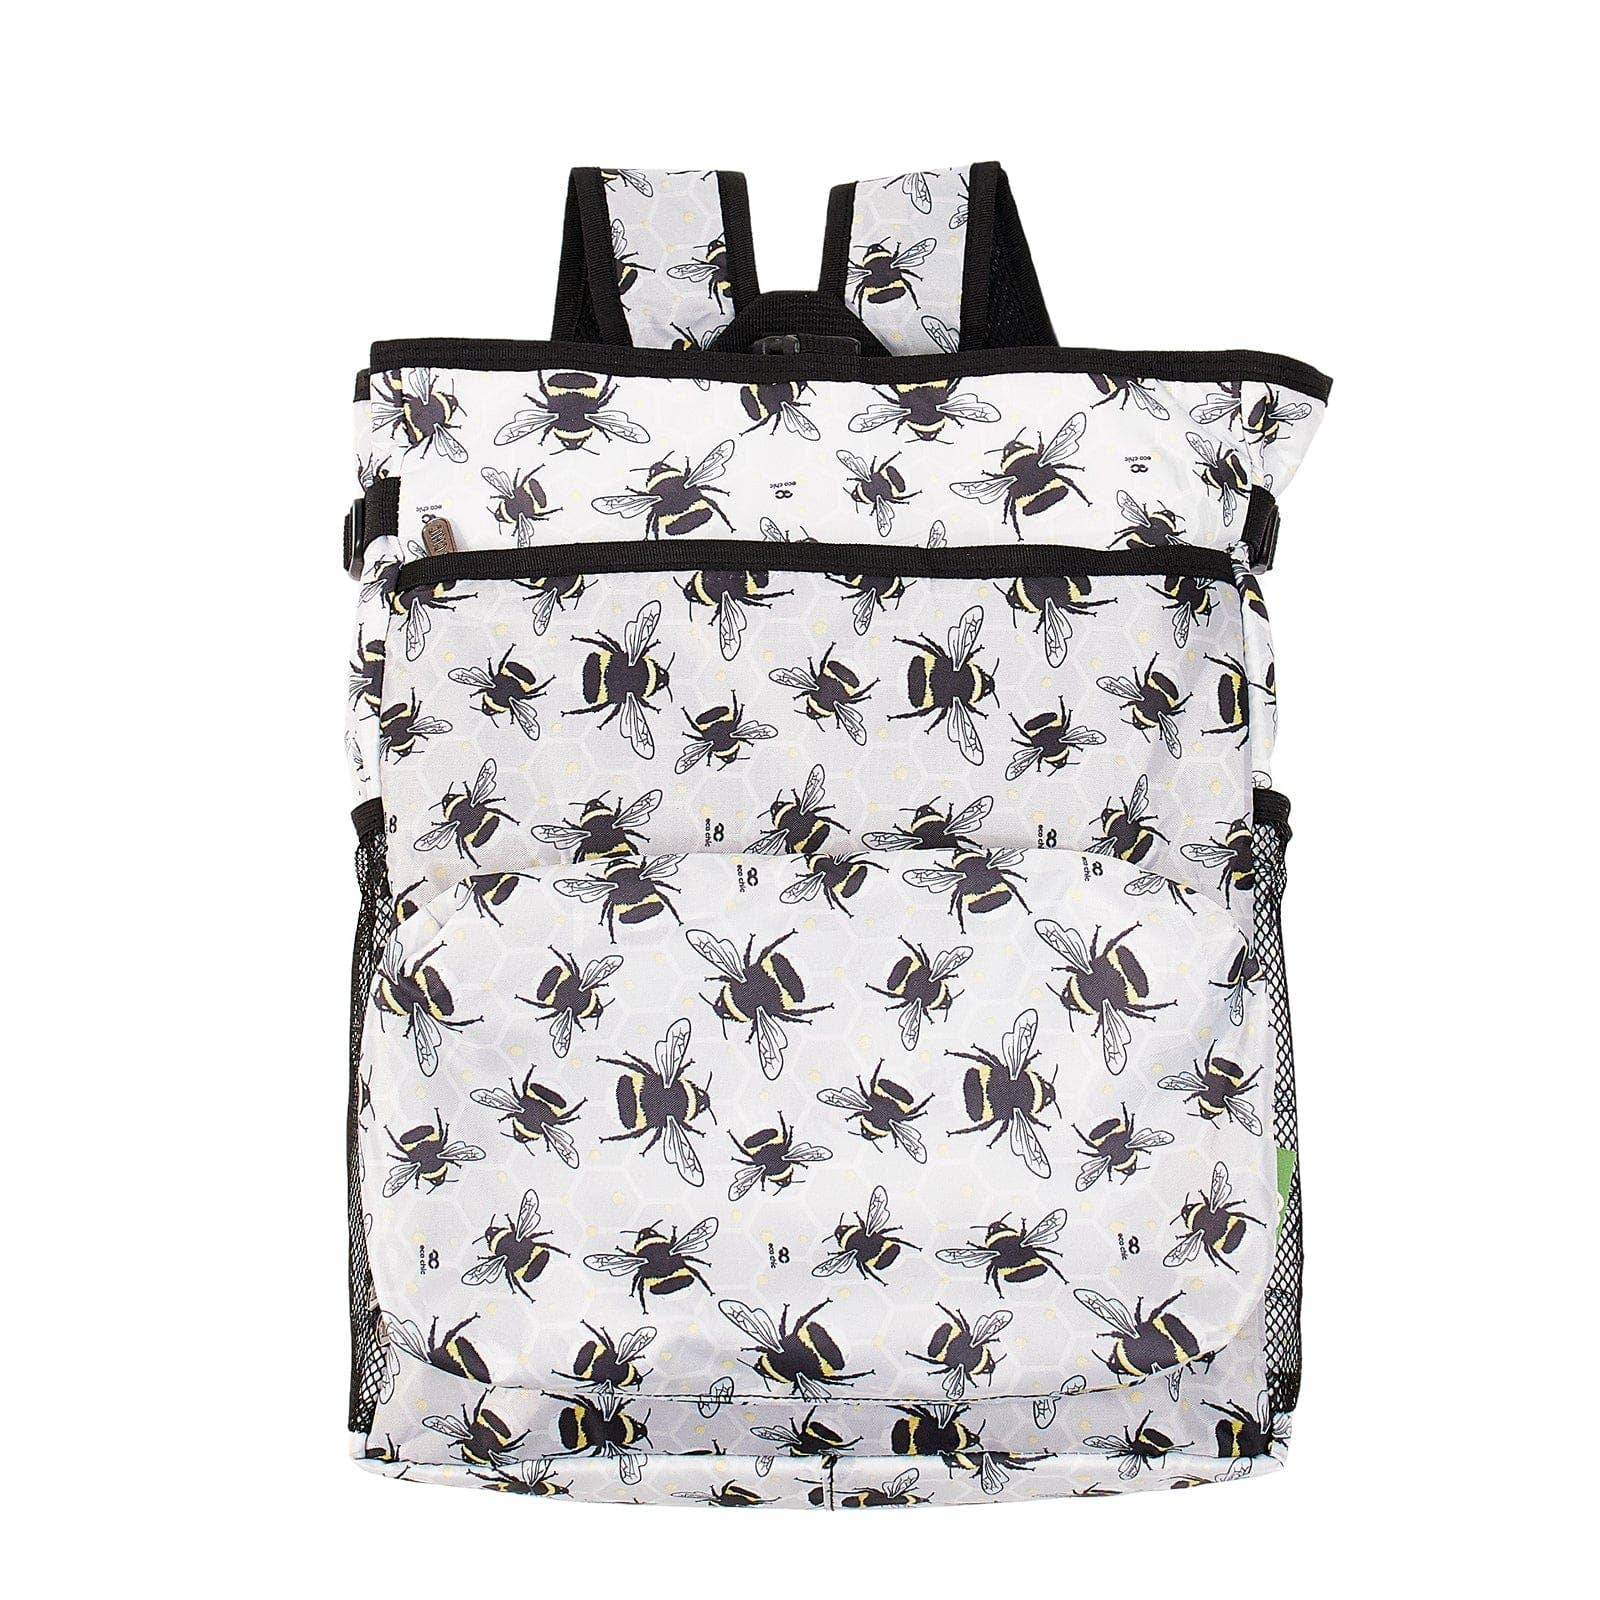 Eco Chic Lightweight Foldable Backpack Cooler Bumble Bees | Faire.com UK